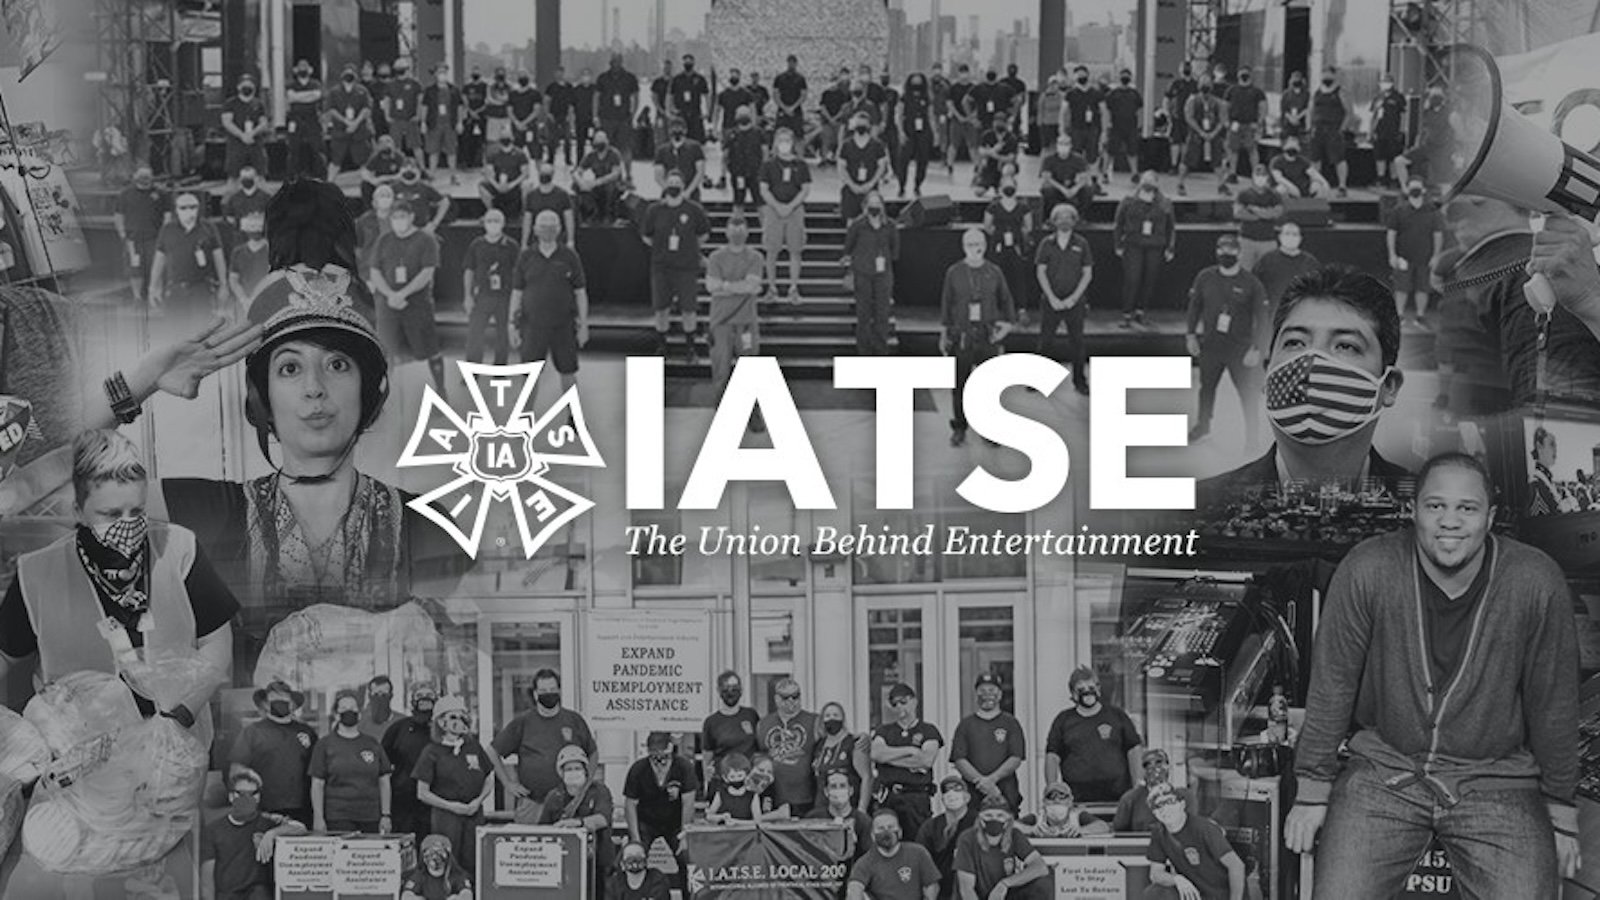 The words IATSE against a black and white collage of different workers looking at us, from crowds to individuals.